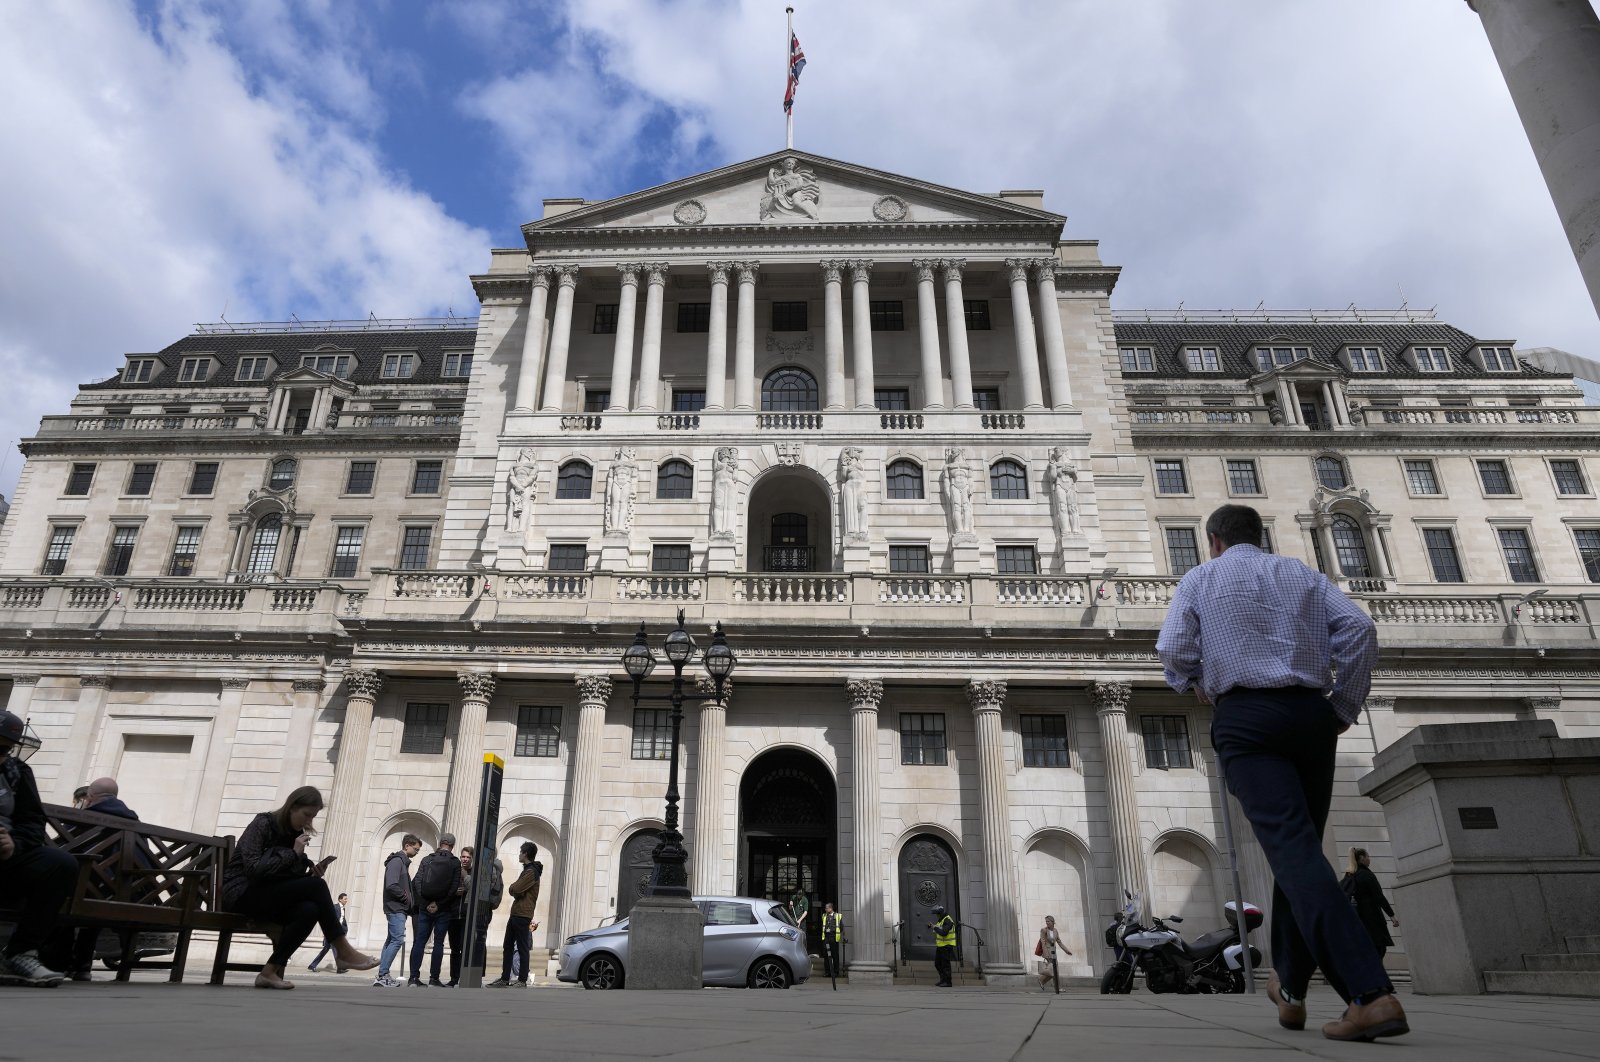 People walk past the Bank of England in London, U.K., May 5, 2022. (AP Photo)